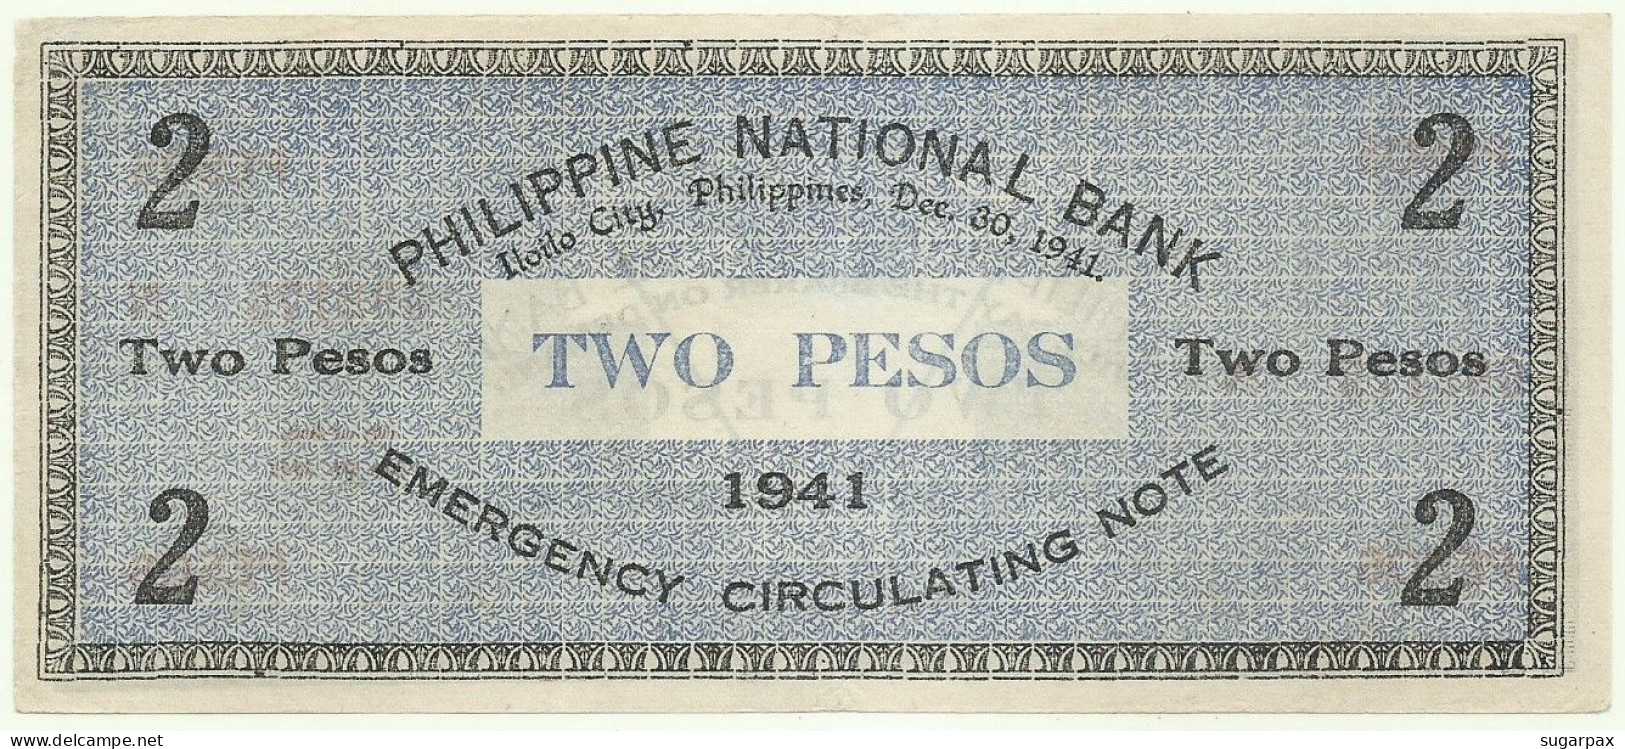 PHILIPPINES - 2 Pesos - 1941 - Pick S 306 - Serie N - ILOILO Currency Committee - Filippine